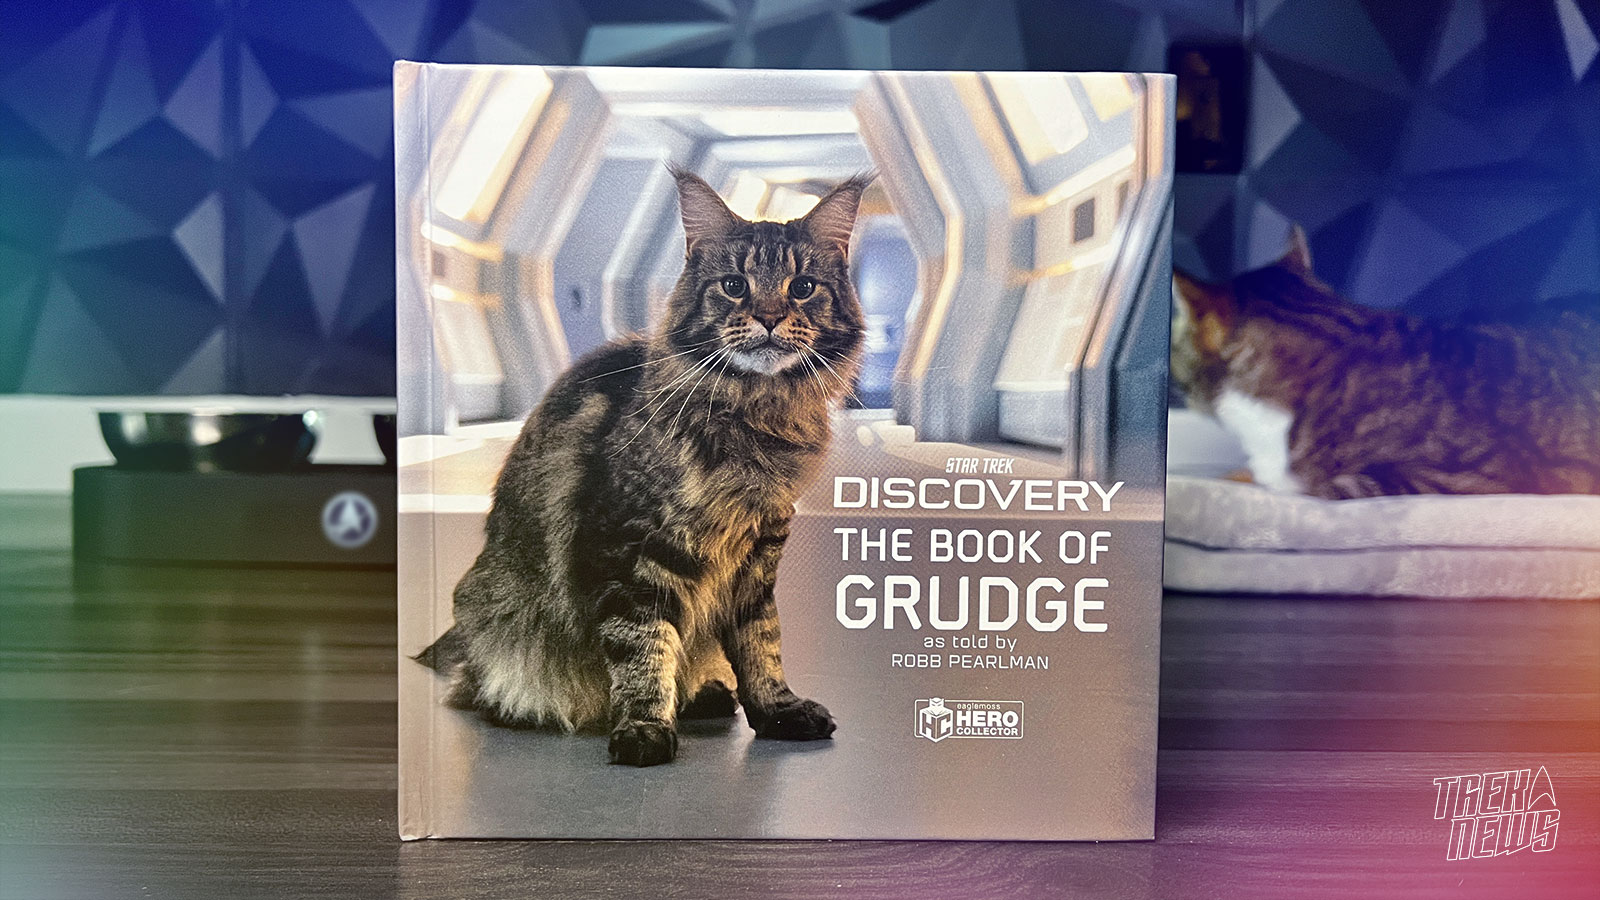 Star Trek: Discovery – The Book Of Grudge Review: Disco’s Queen Gets Her Own Profile